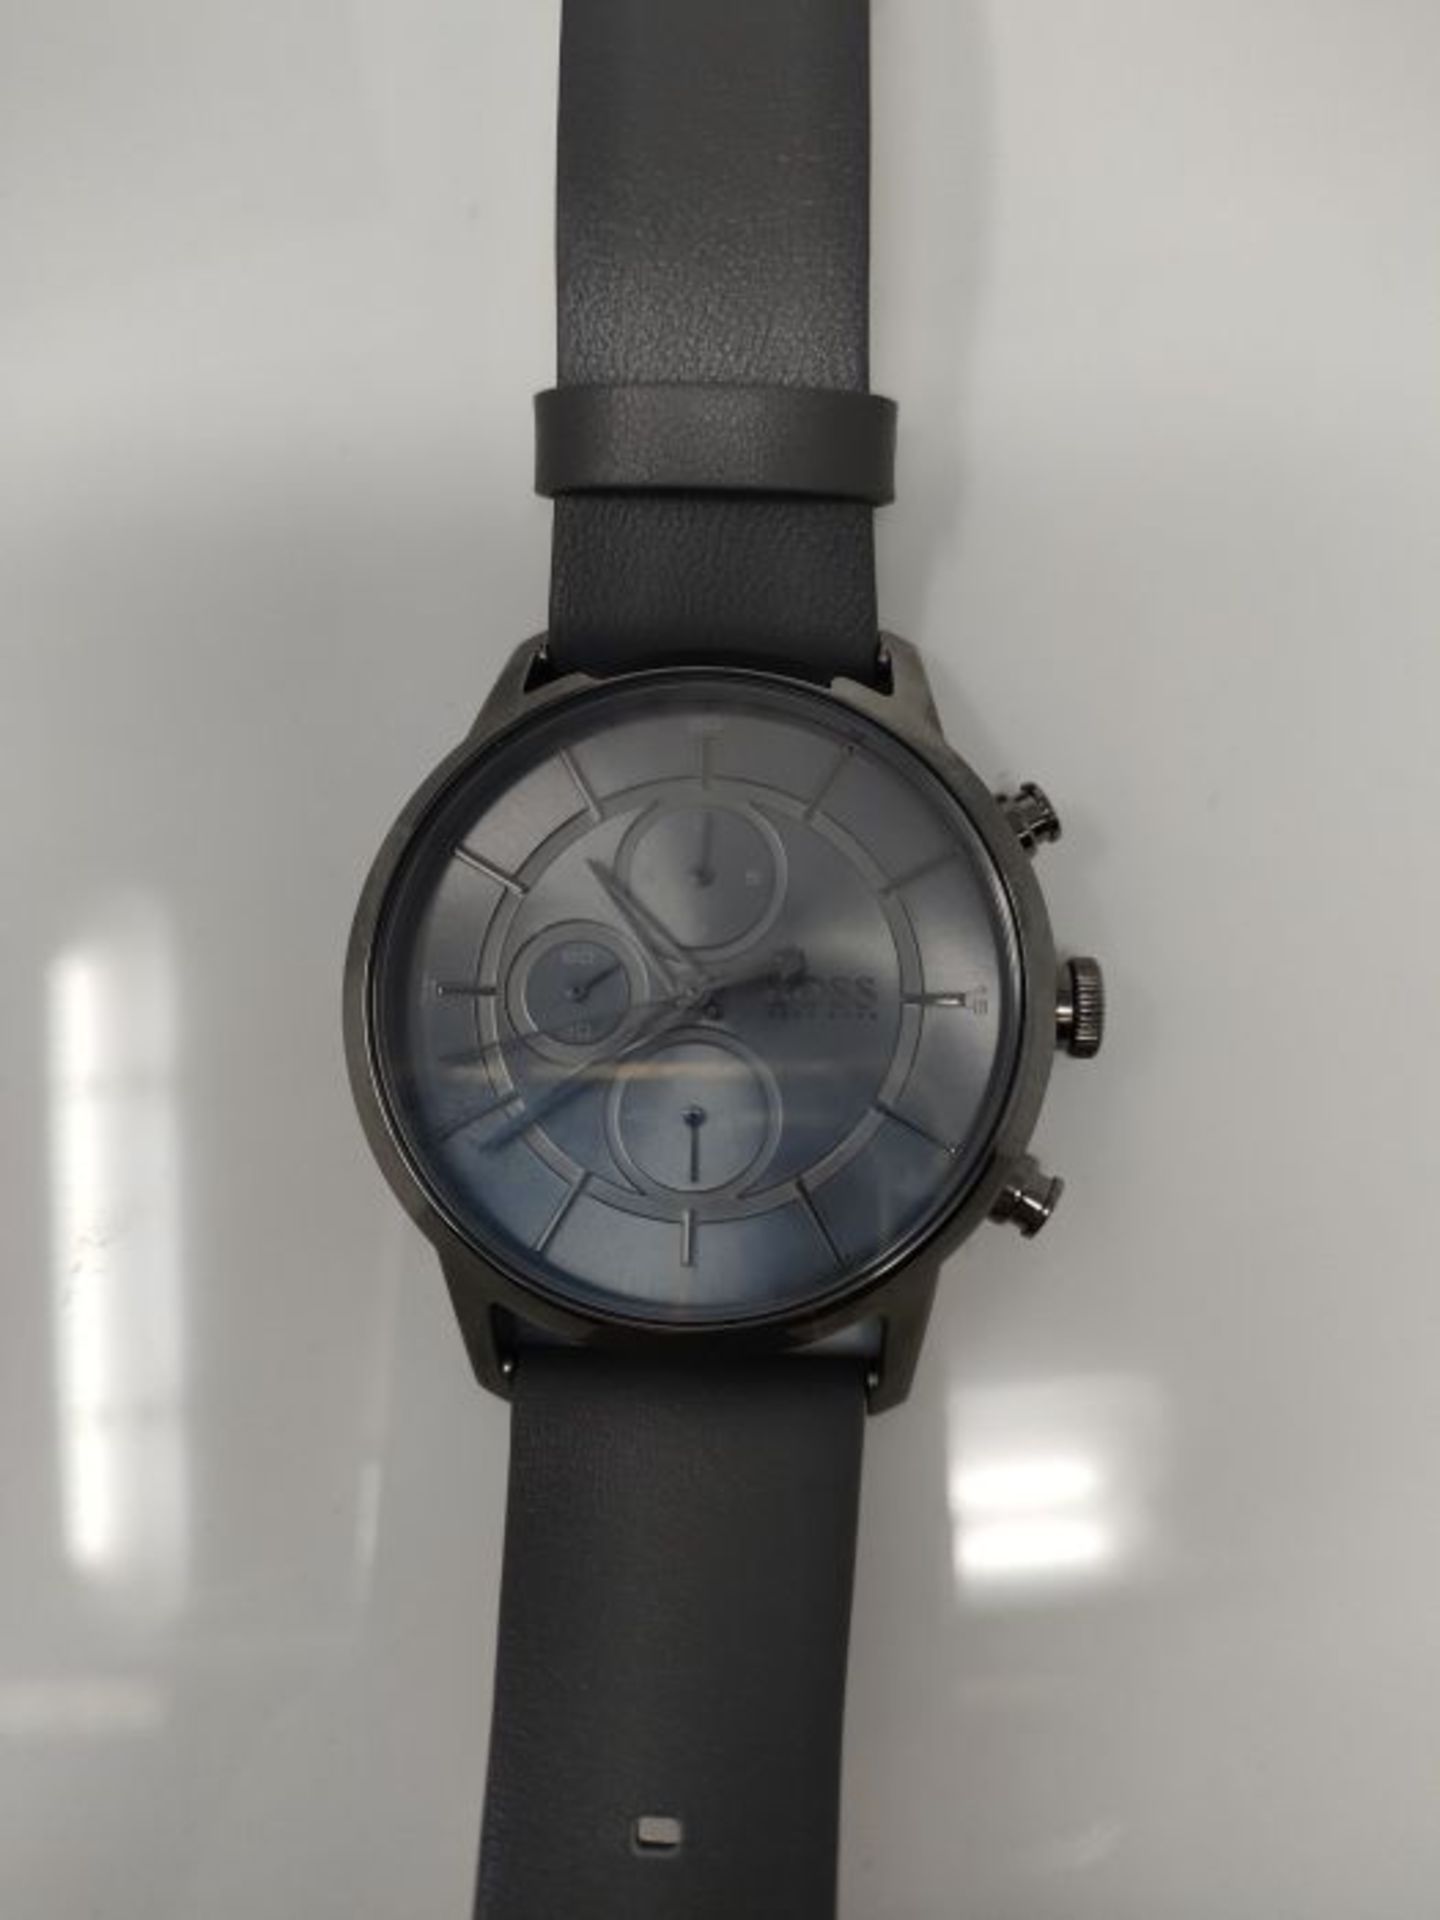 RRP £297.00 BOSS Unisex-Adult Chronograph Quartz Watch with Leather Strap 1513570 - Image 3 of 3